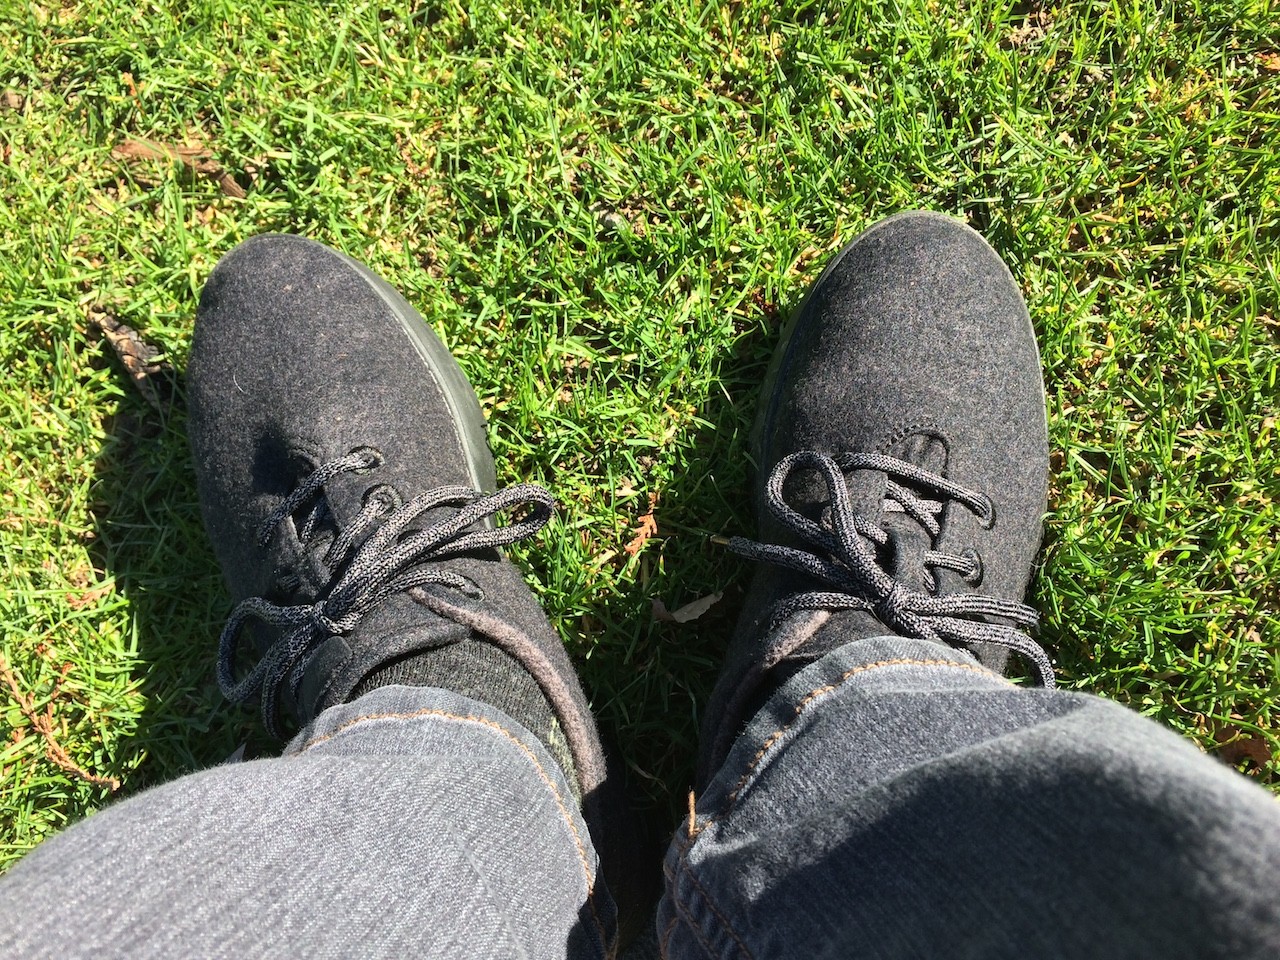 Allbirds Wool Runners: The best shoes ever? – Snarky Nomad